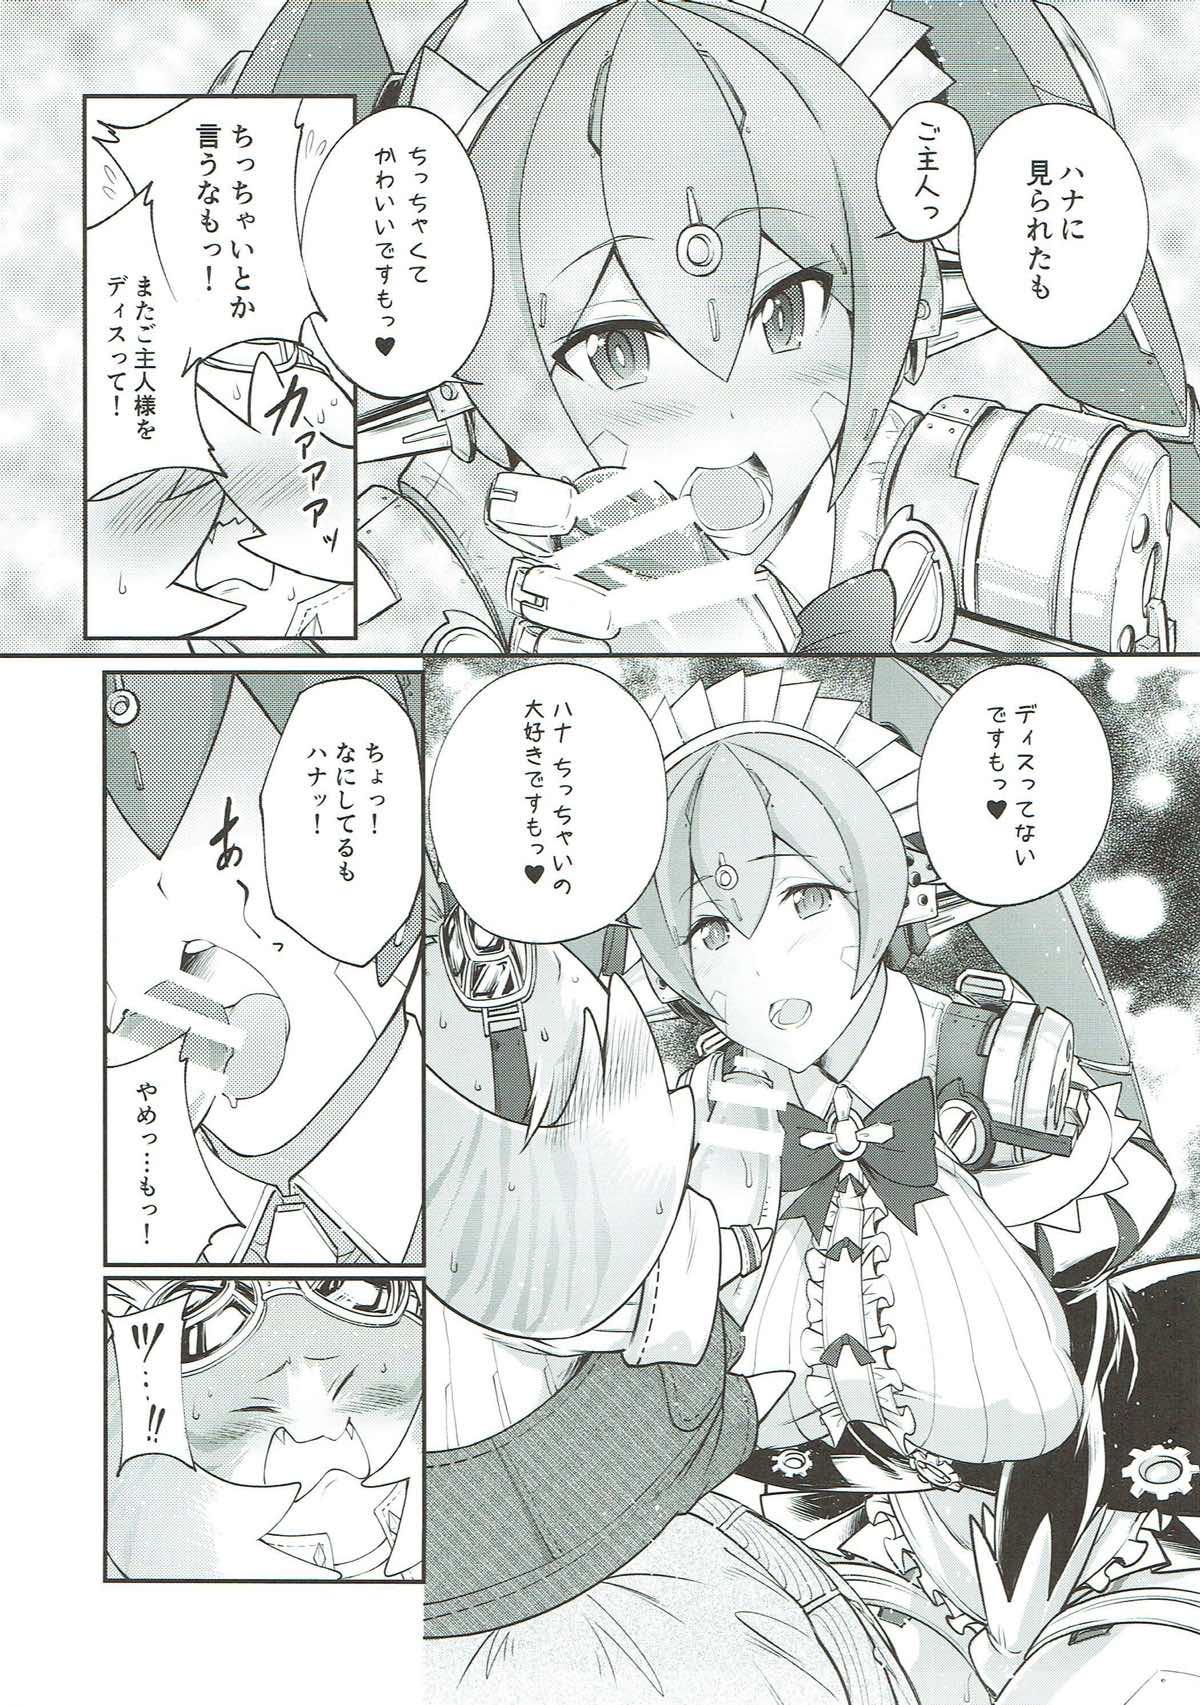 Assfucking Tiger x Flower - Xenoblade chronicles 2 Analfucking - Page 6